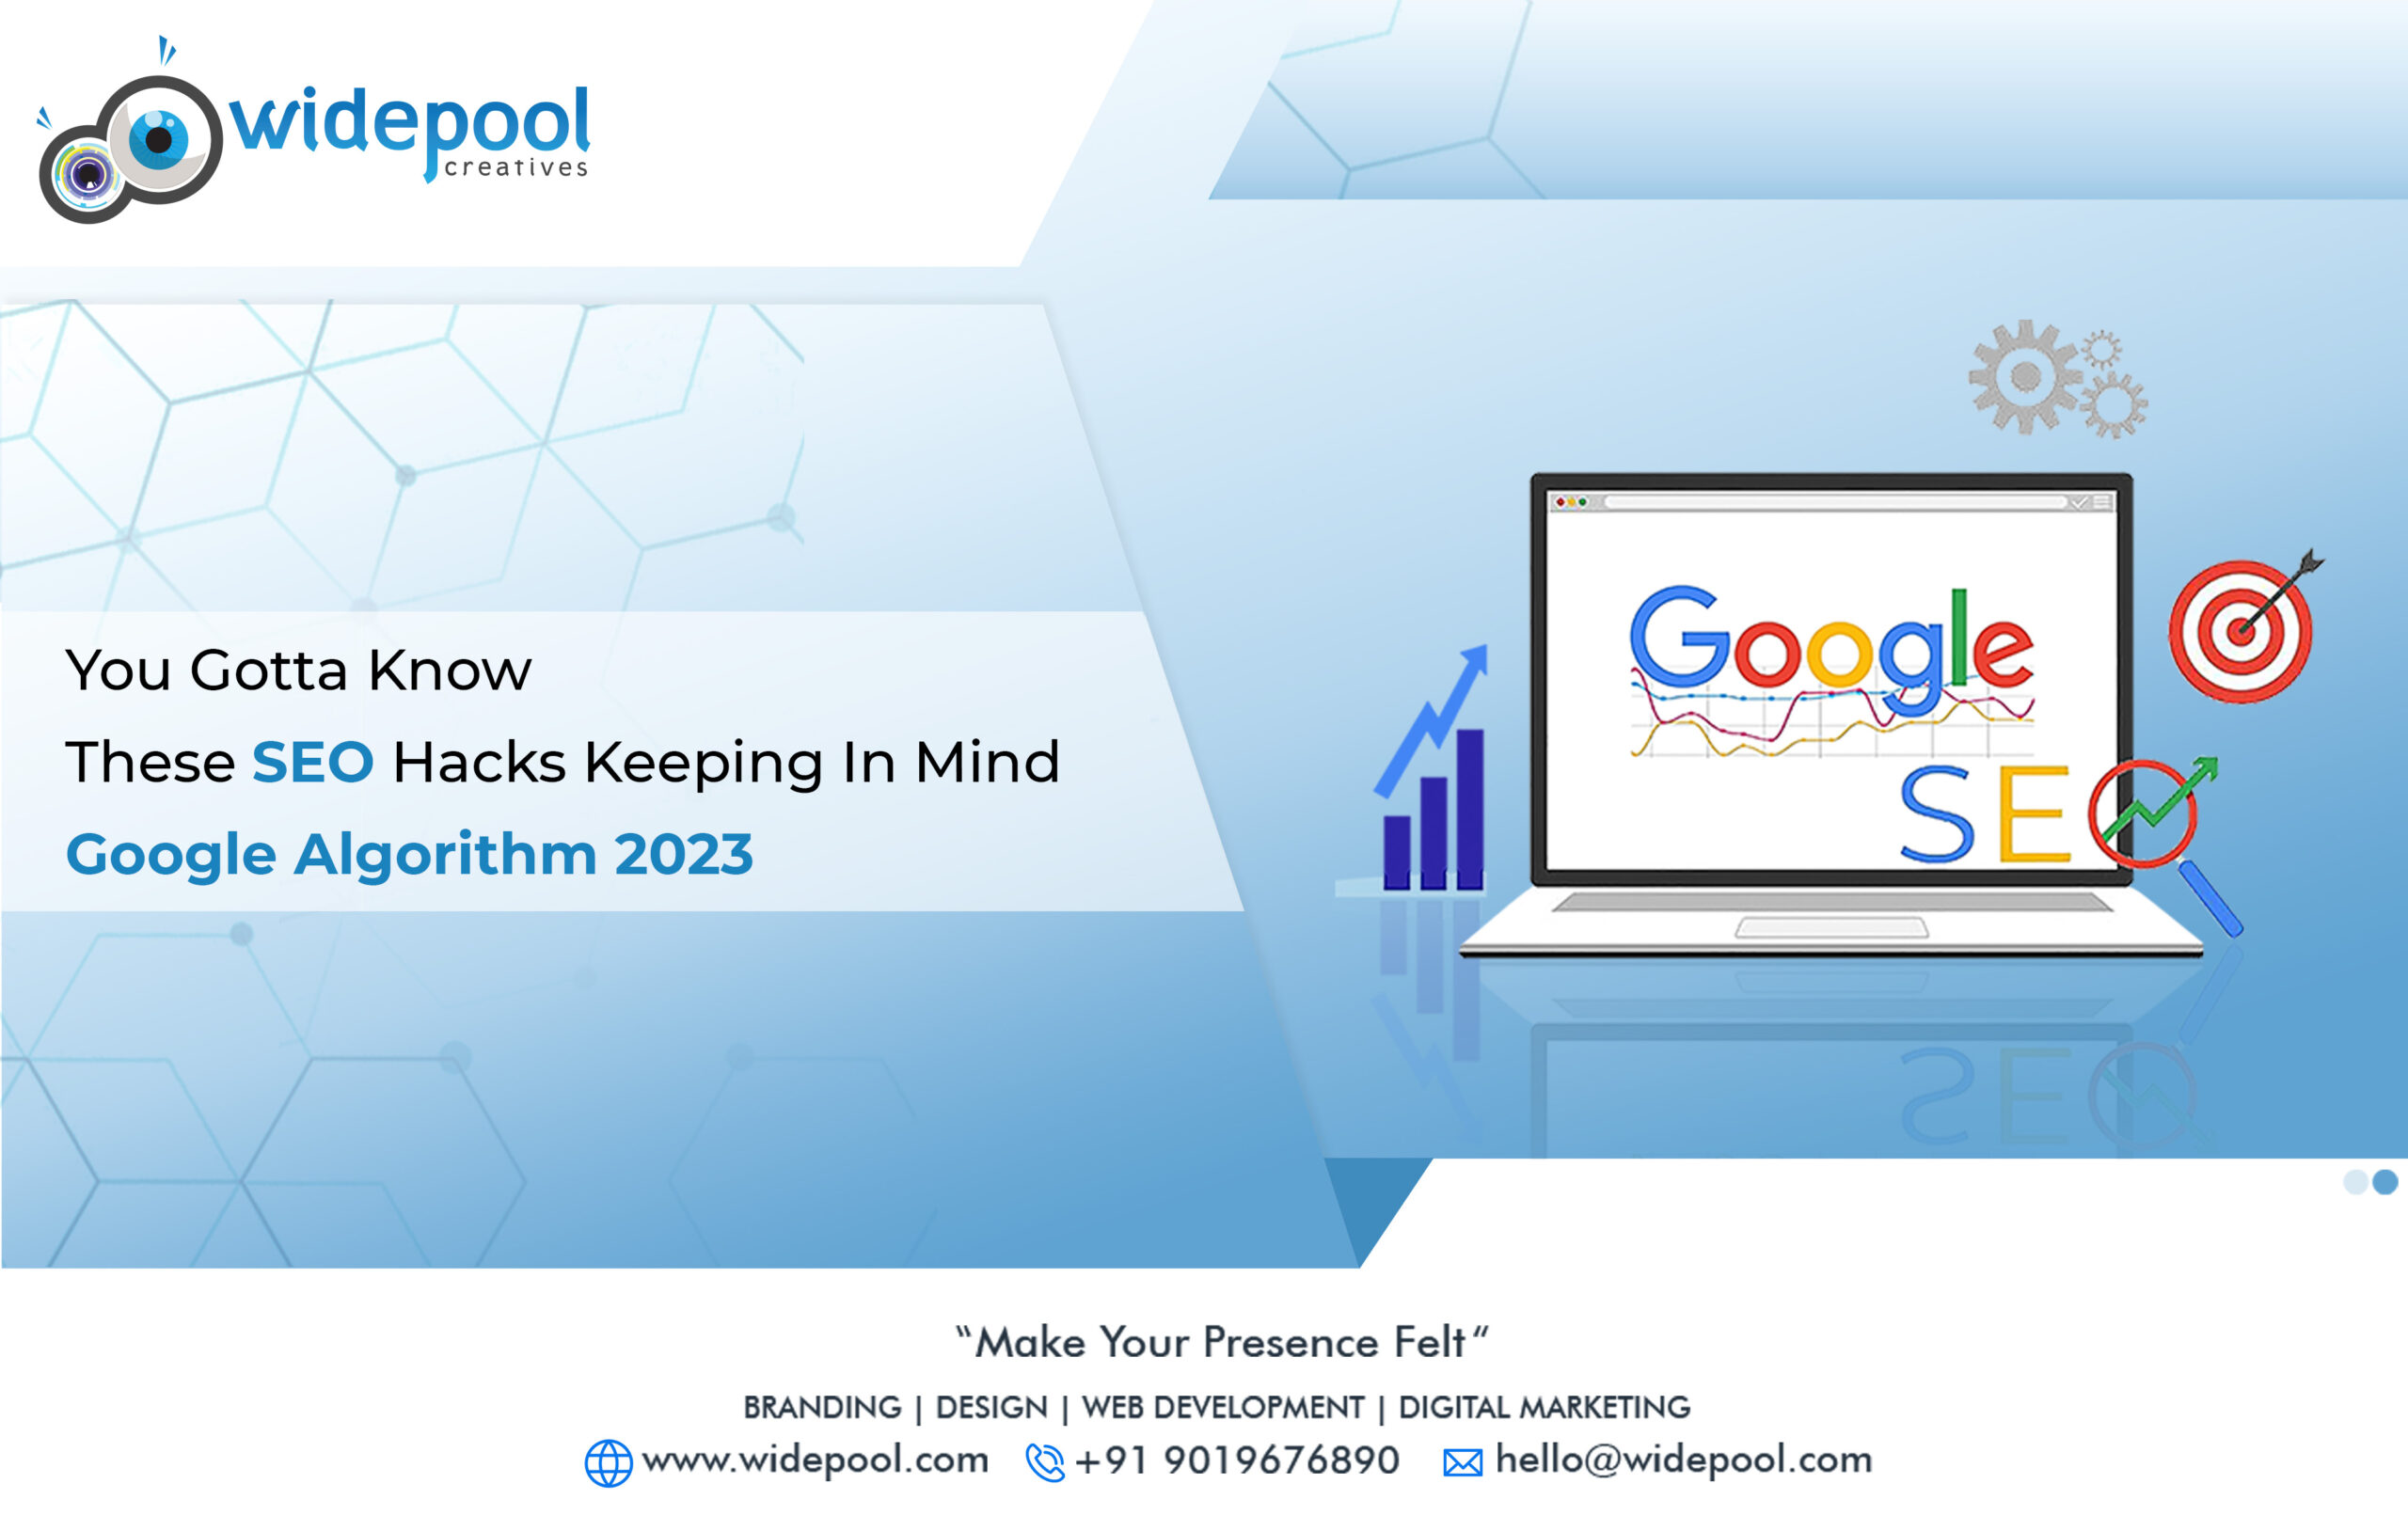 You Gotta Know These SEO Hacks Keeping in Mind Google Algorithm 2023